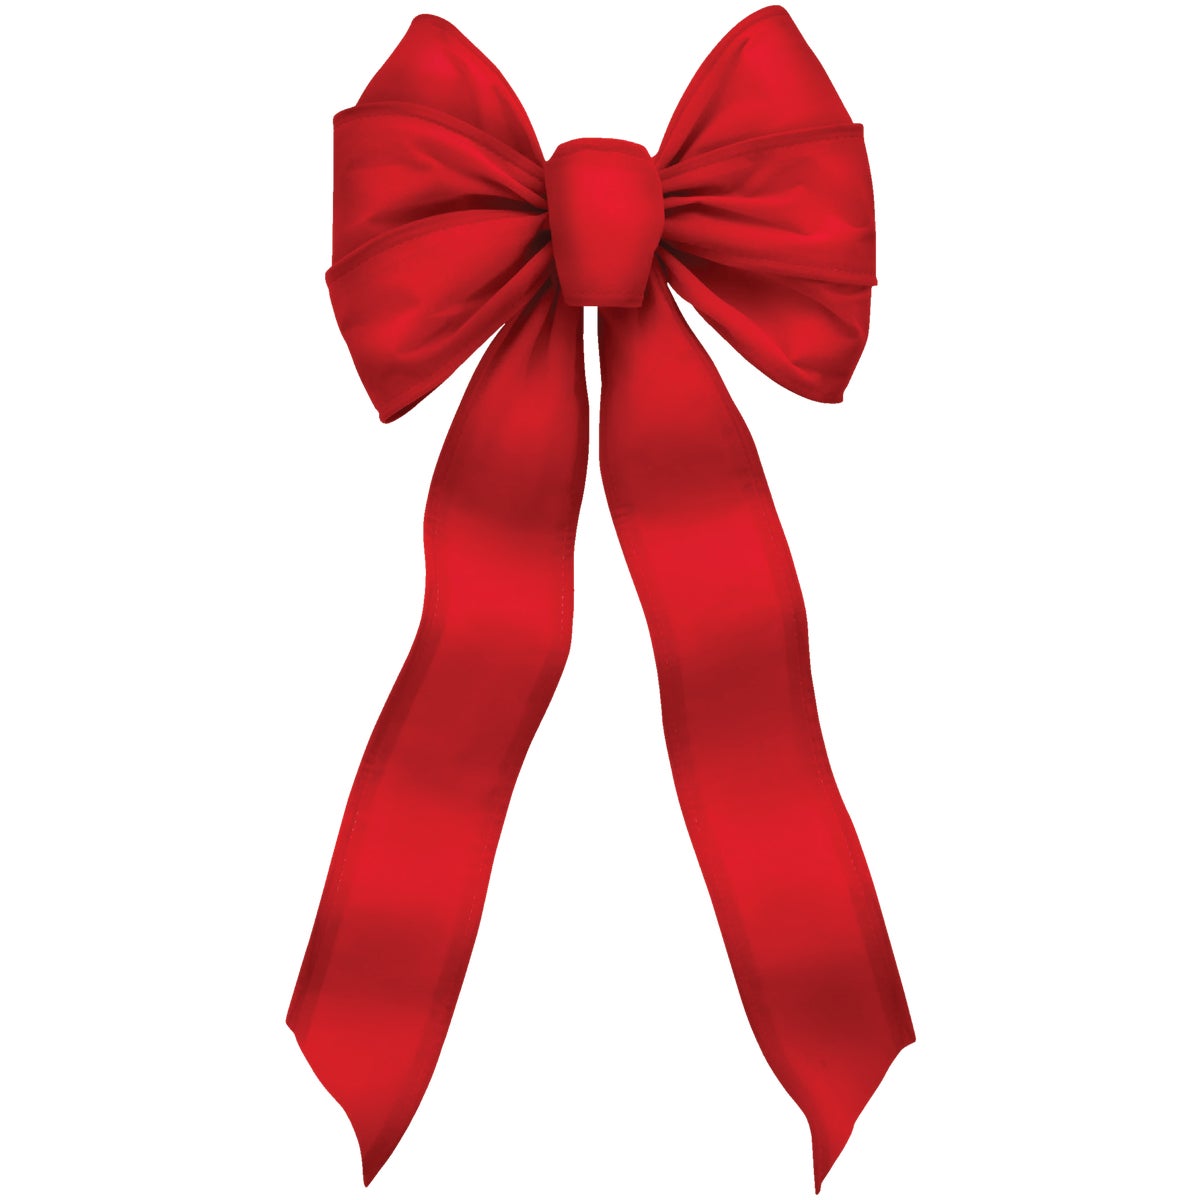 Item 900003, 7-loop red velvet bow. Features wire edges to shape and form as desired.